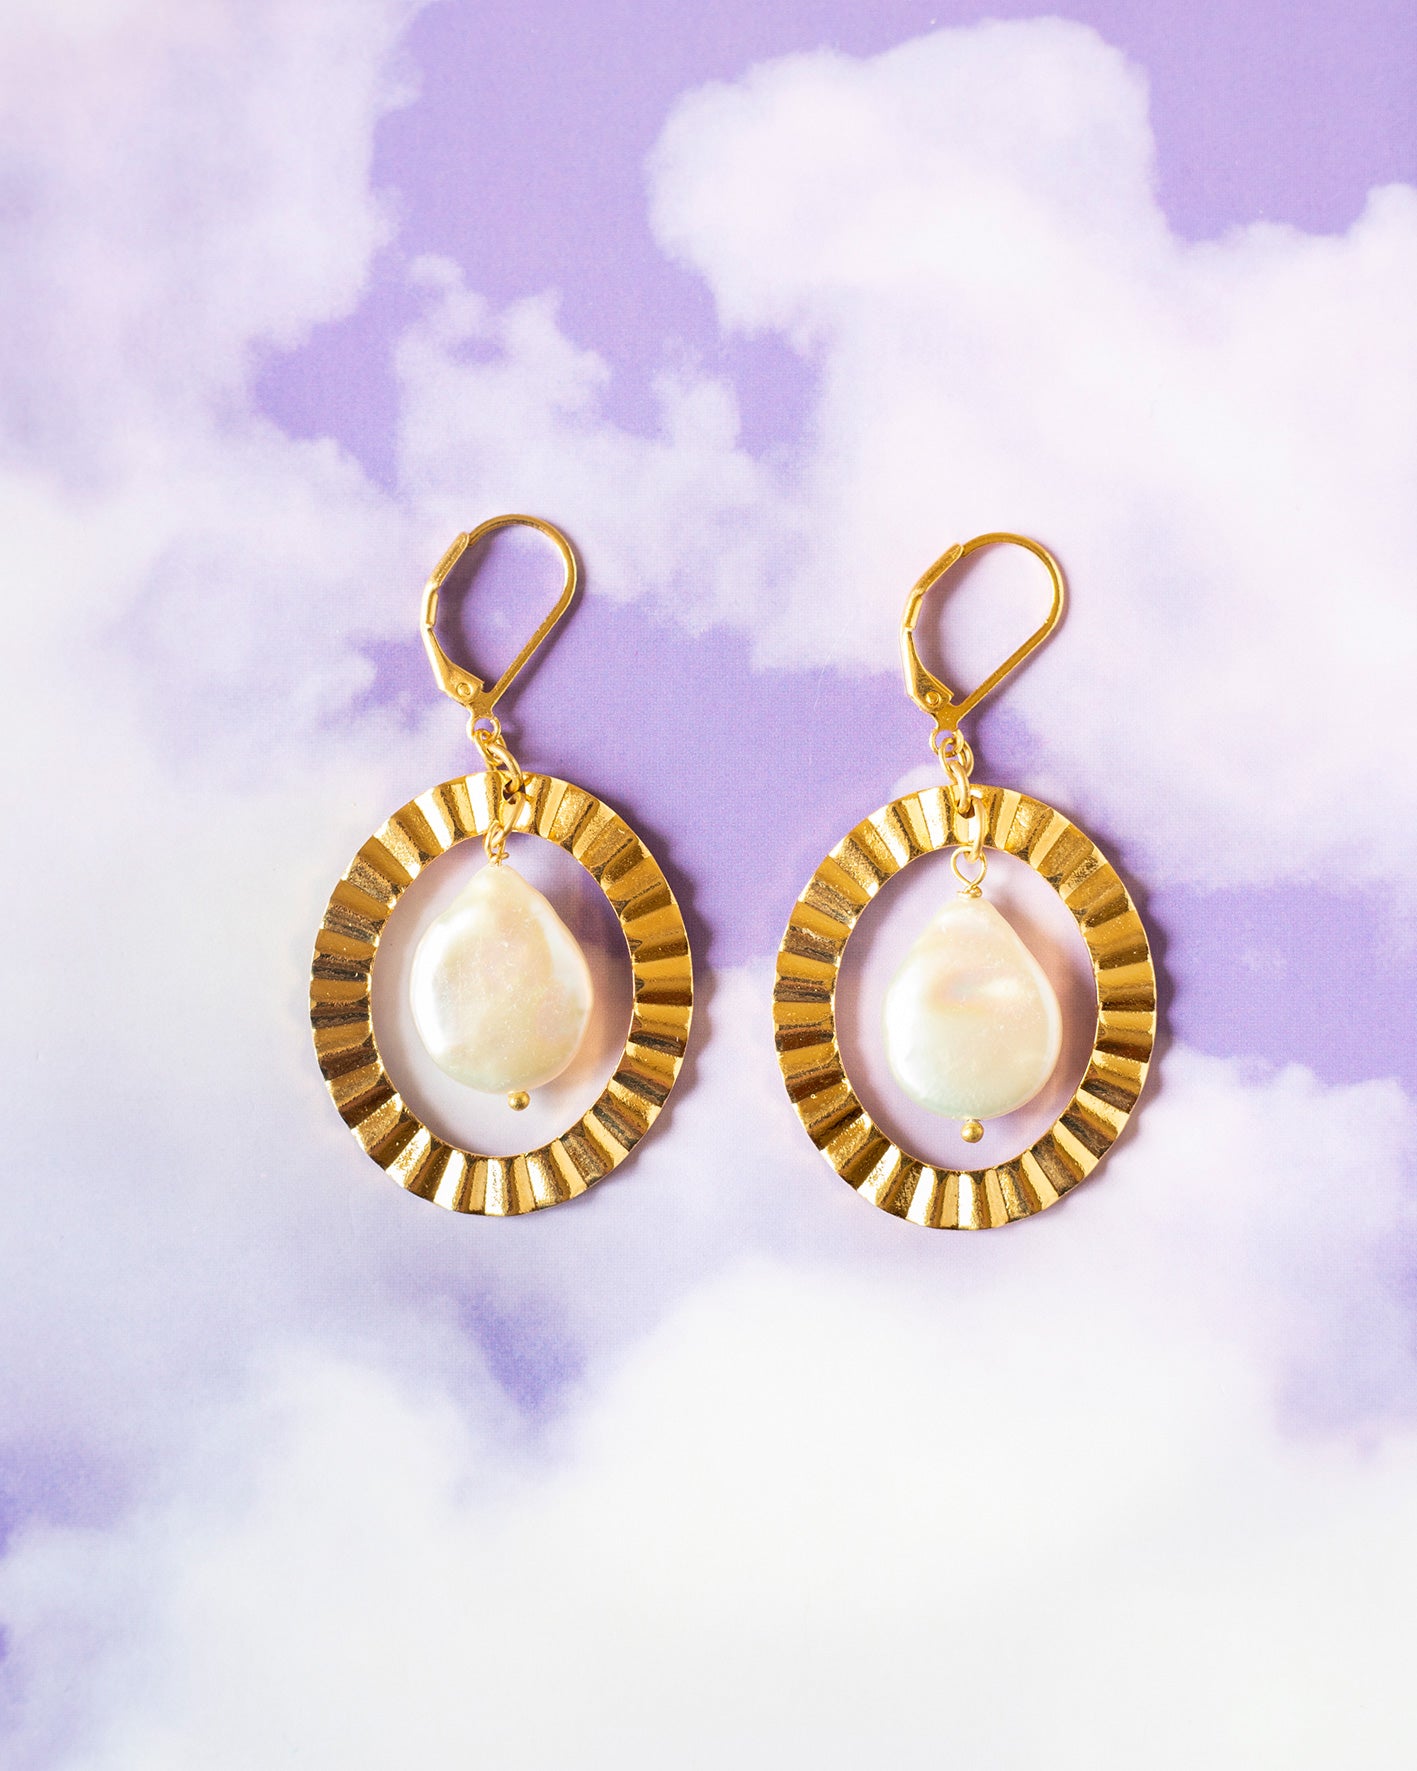 Large freshwater pearl earrings and gold pendant